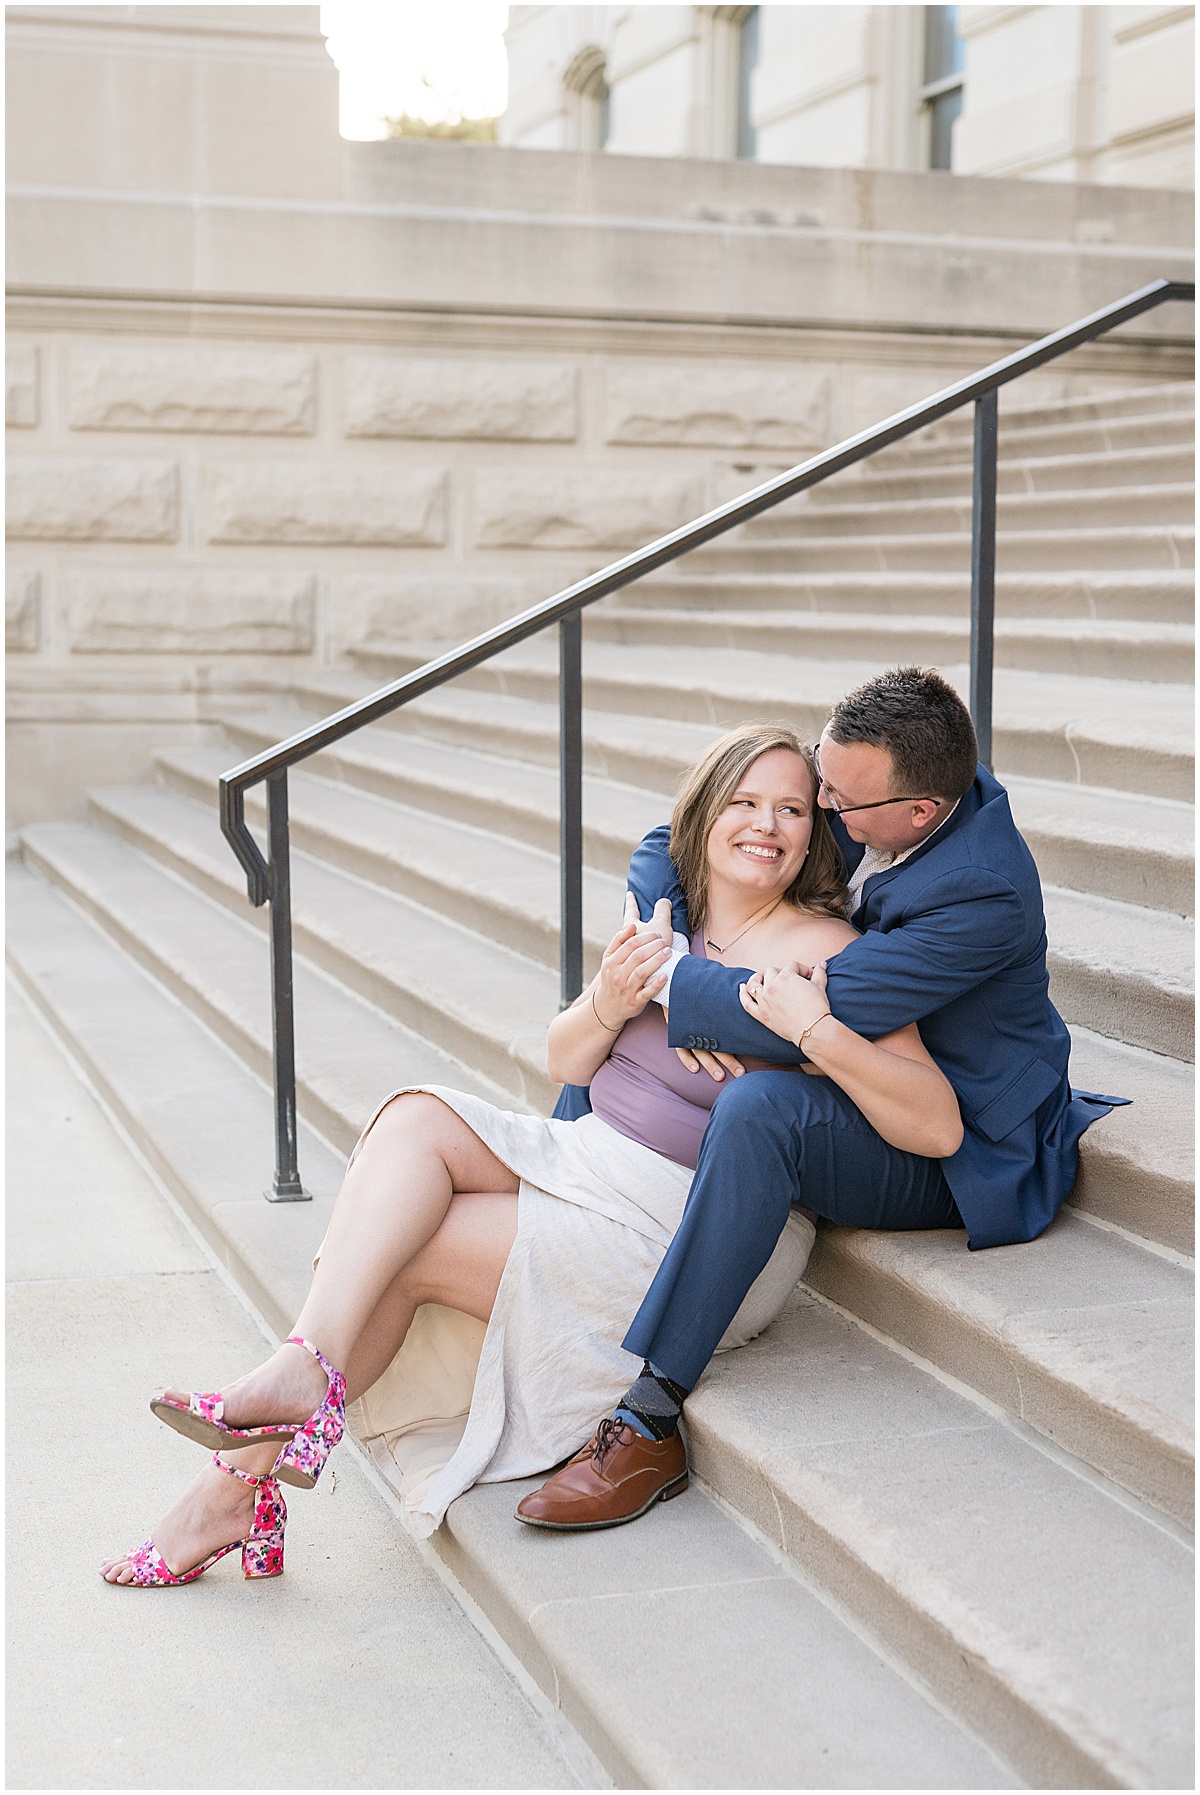 Couple sitting on steps during engagement photos in downtown Indianapolis by the Indiana State Capitol Building.